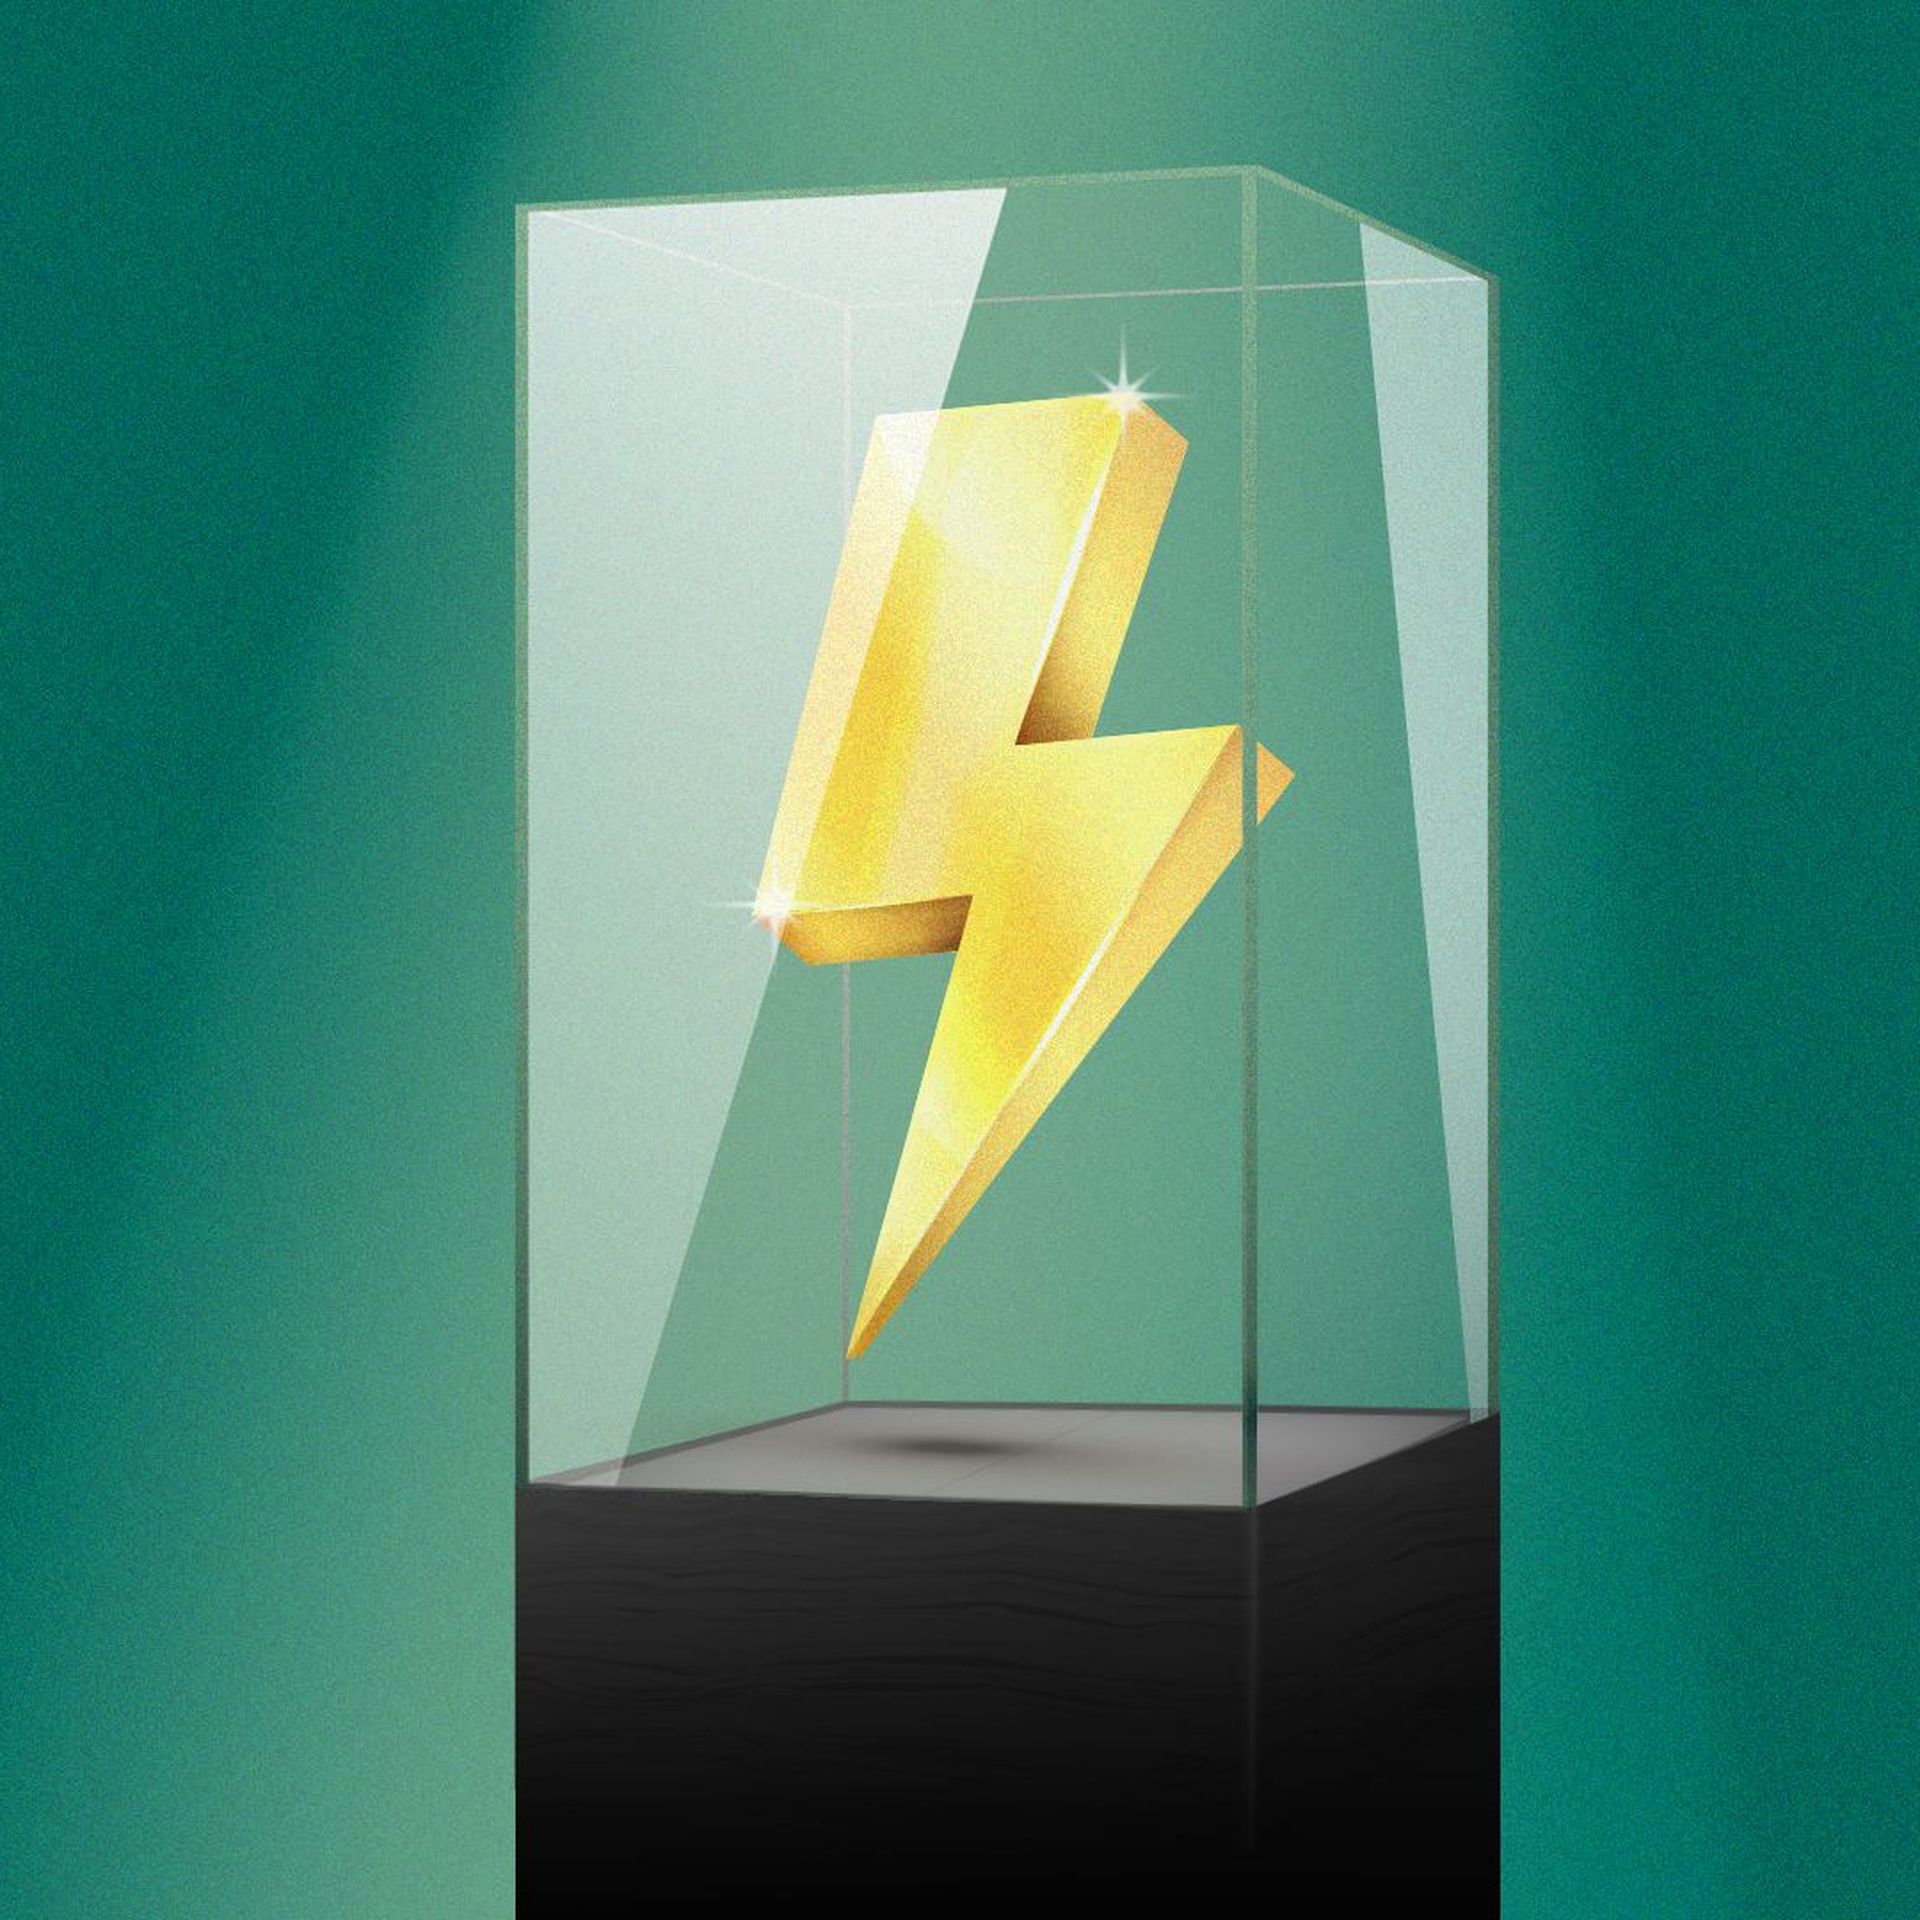 Illustration of an energy lightning bolt in a glass display case.